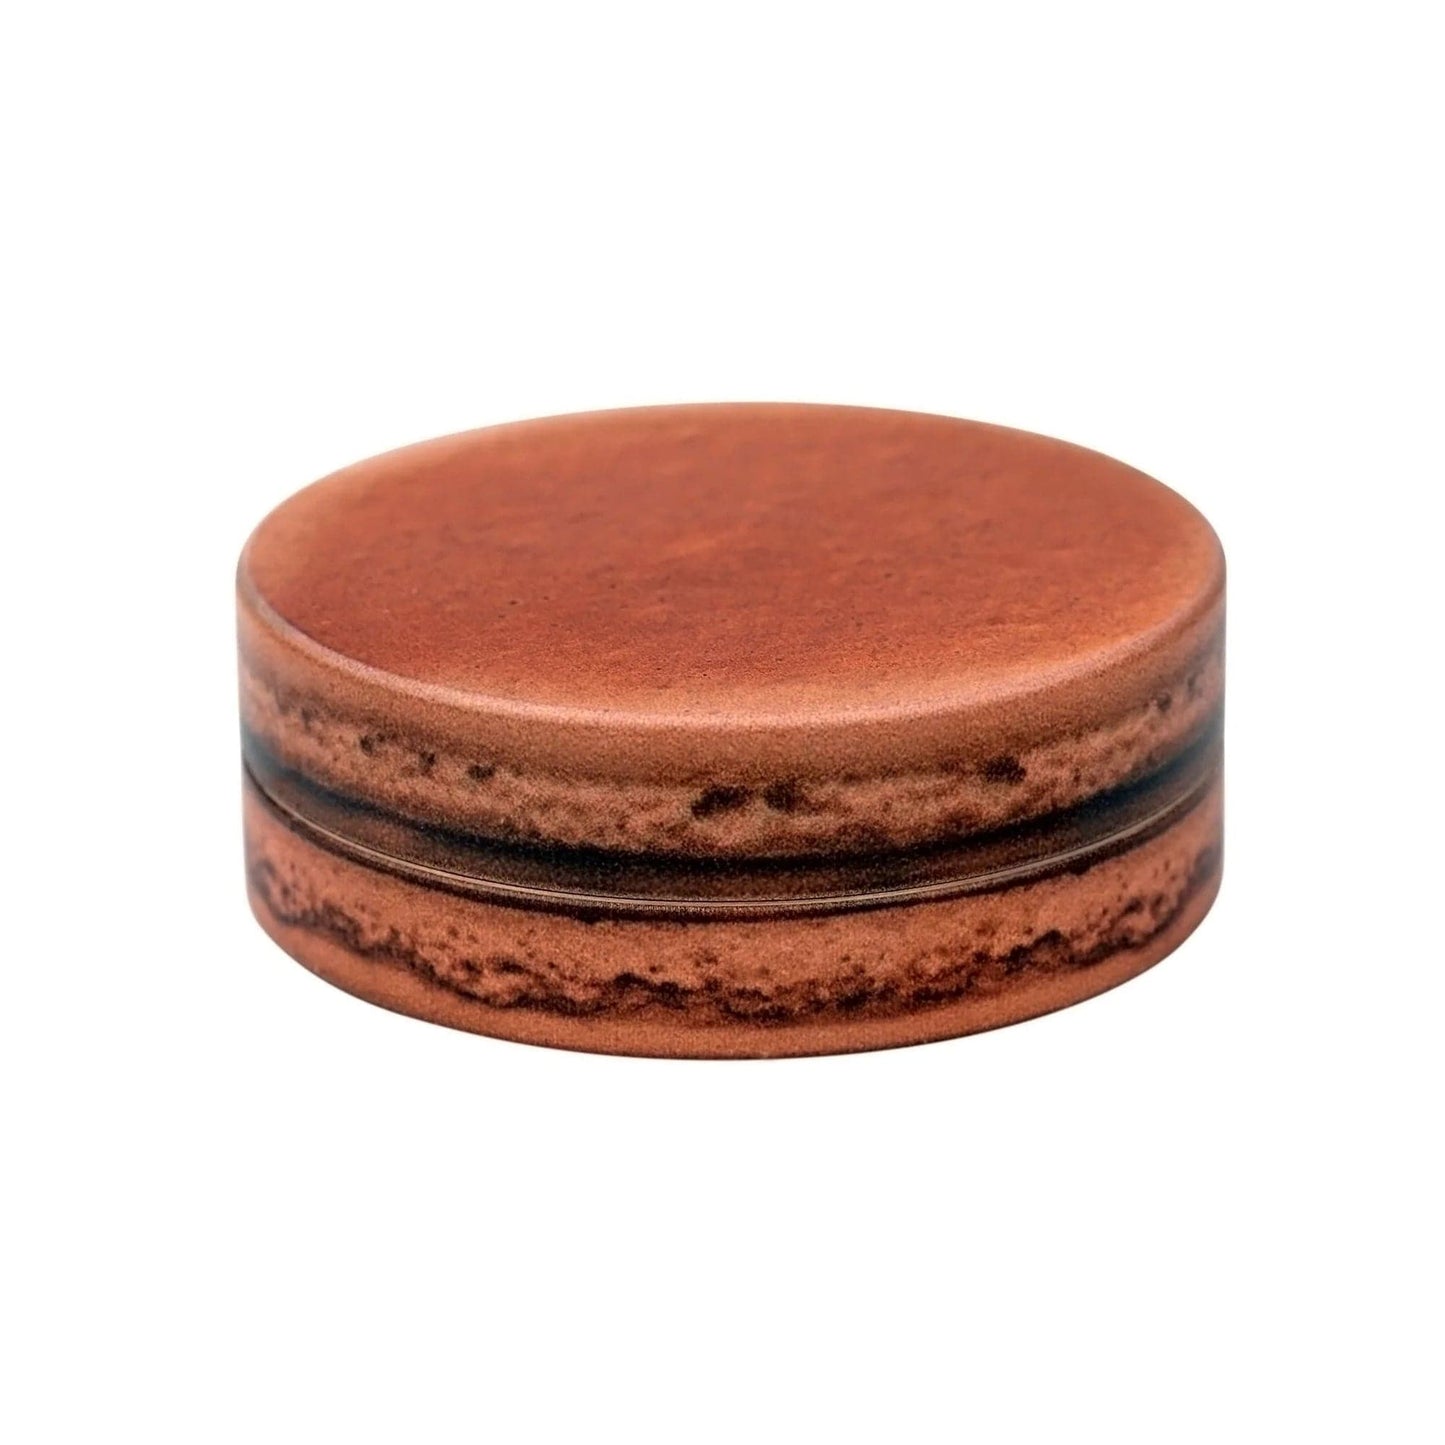 V-Syndicate Chocolate Macaron / Metal SharpShred Dine-In 2 Piece Grinders